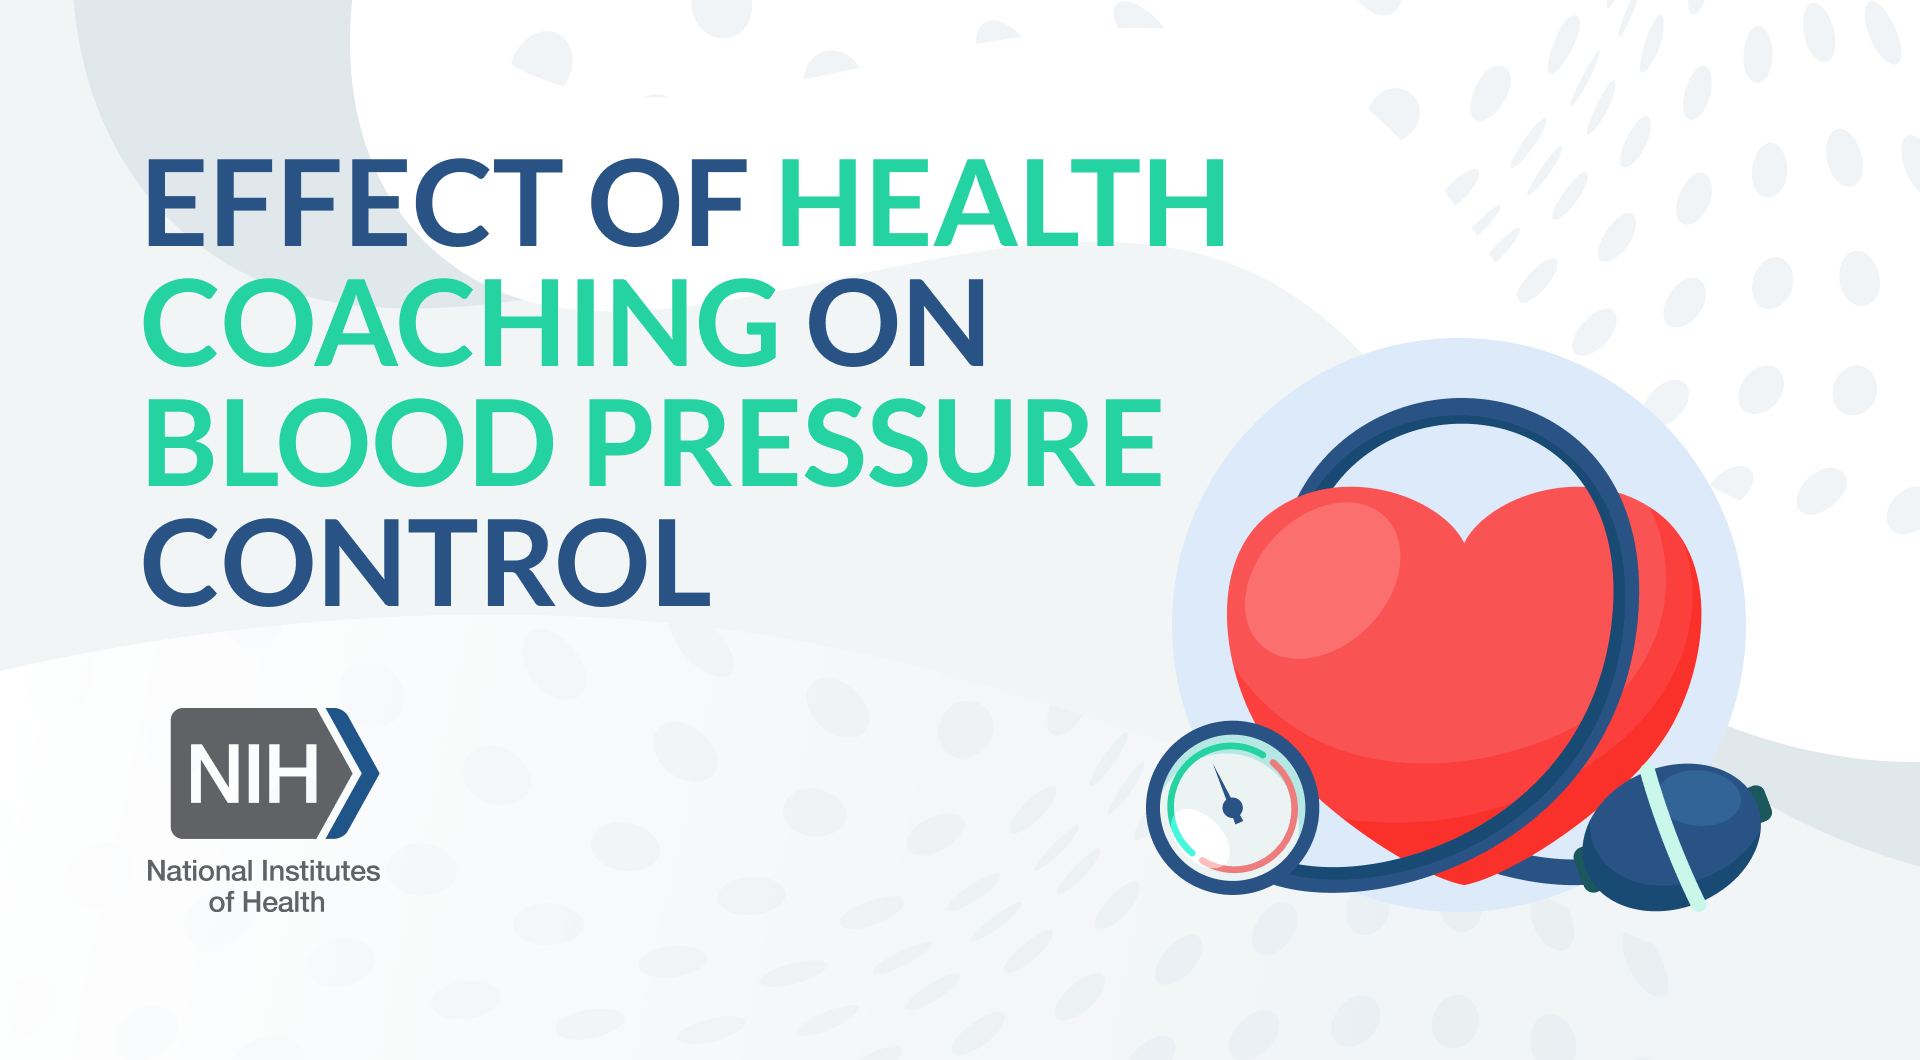 Effect of health coaching on blood pressure control and behavioral modification among patients with hypertension: